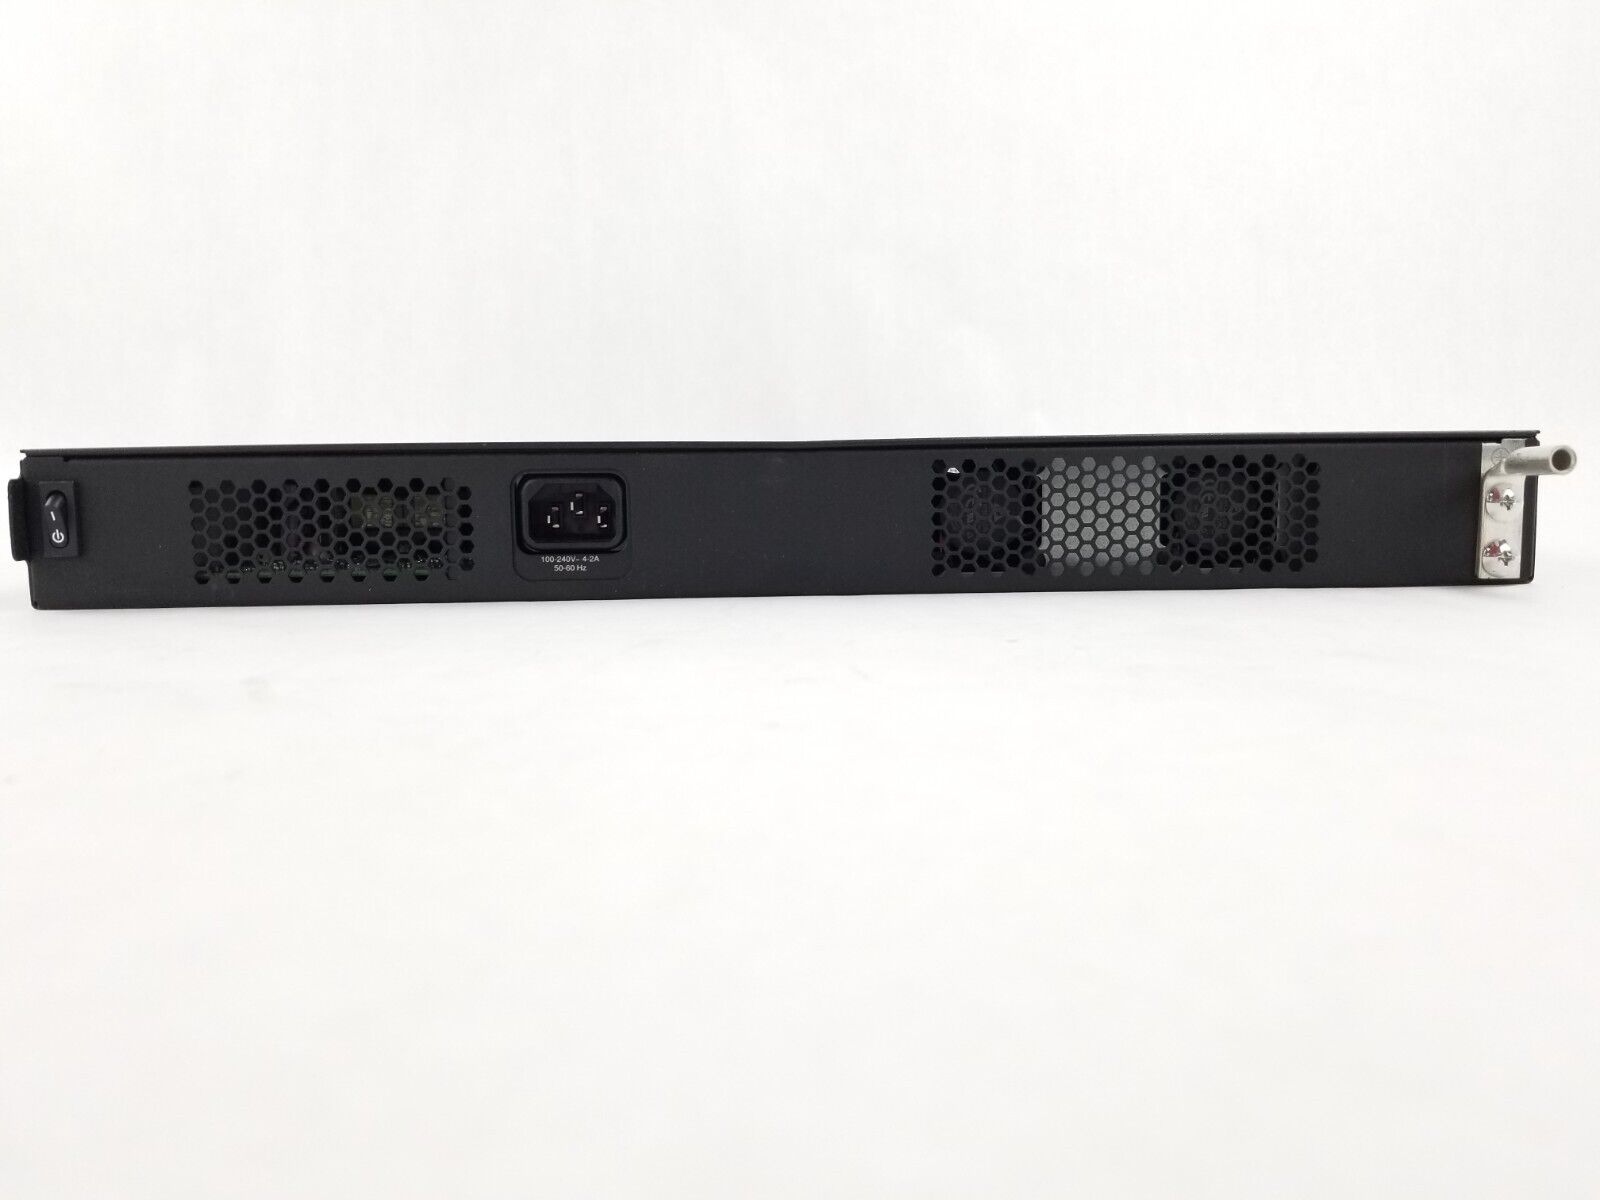 Cisco FPR-2120-NGFW-K9 FirePower 2100 Series Security Appliance